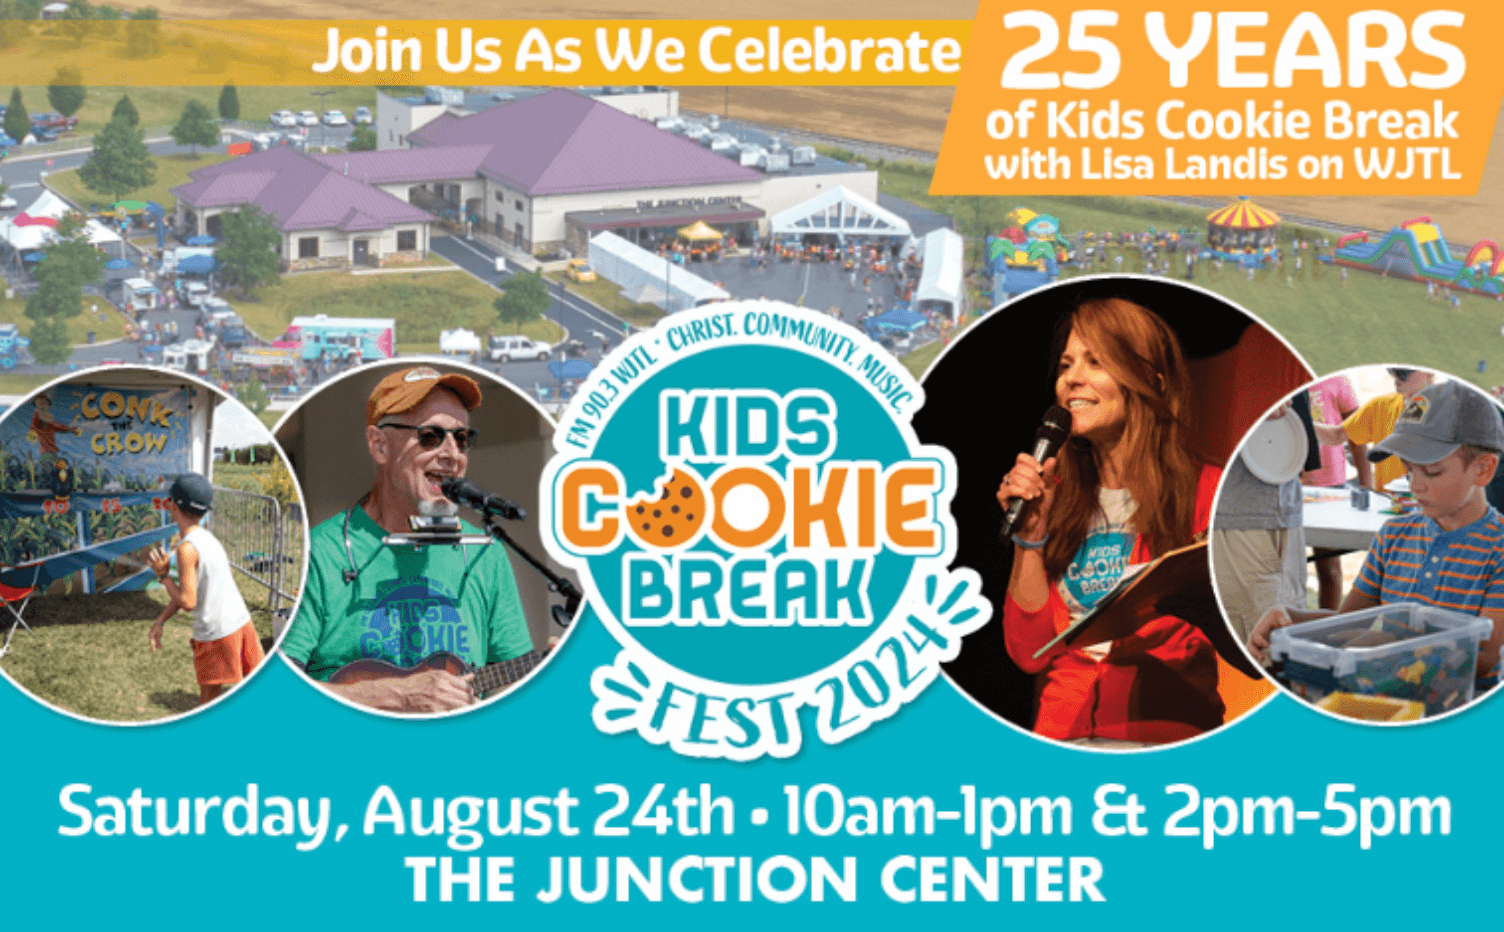 Kids Cookie Break Event located at The Junction Center, 1875 Junction Road, Manheim, PA 17545